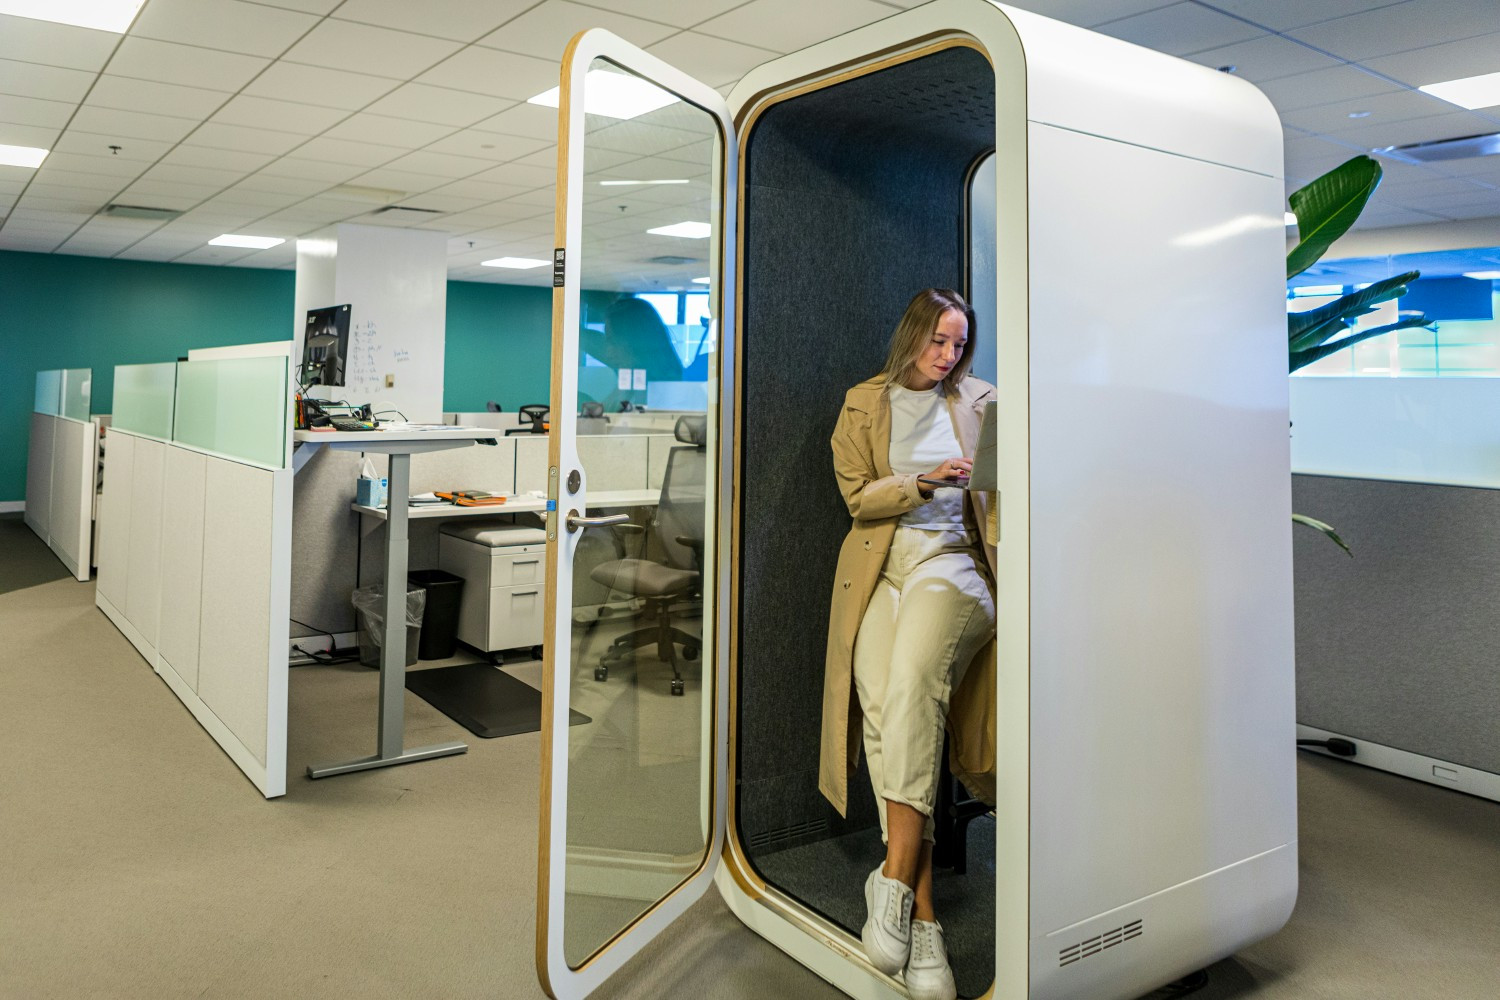 An employee uses one of the Boston office's private quiet rooms for an online meeting with a colleague abroad.